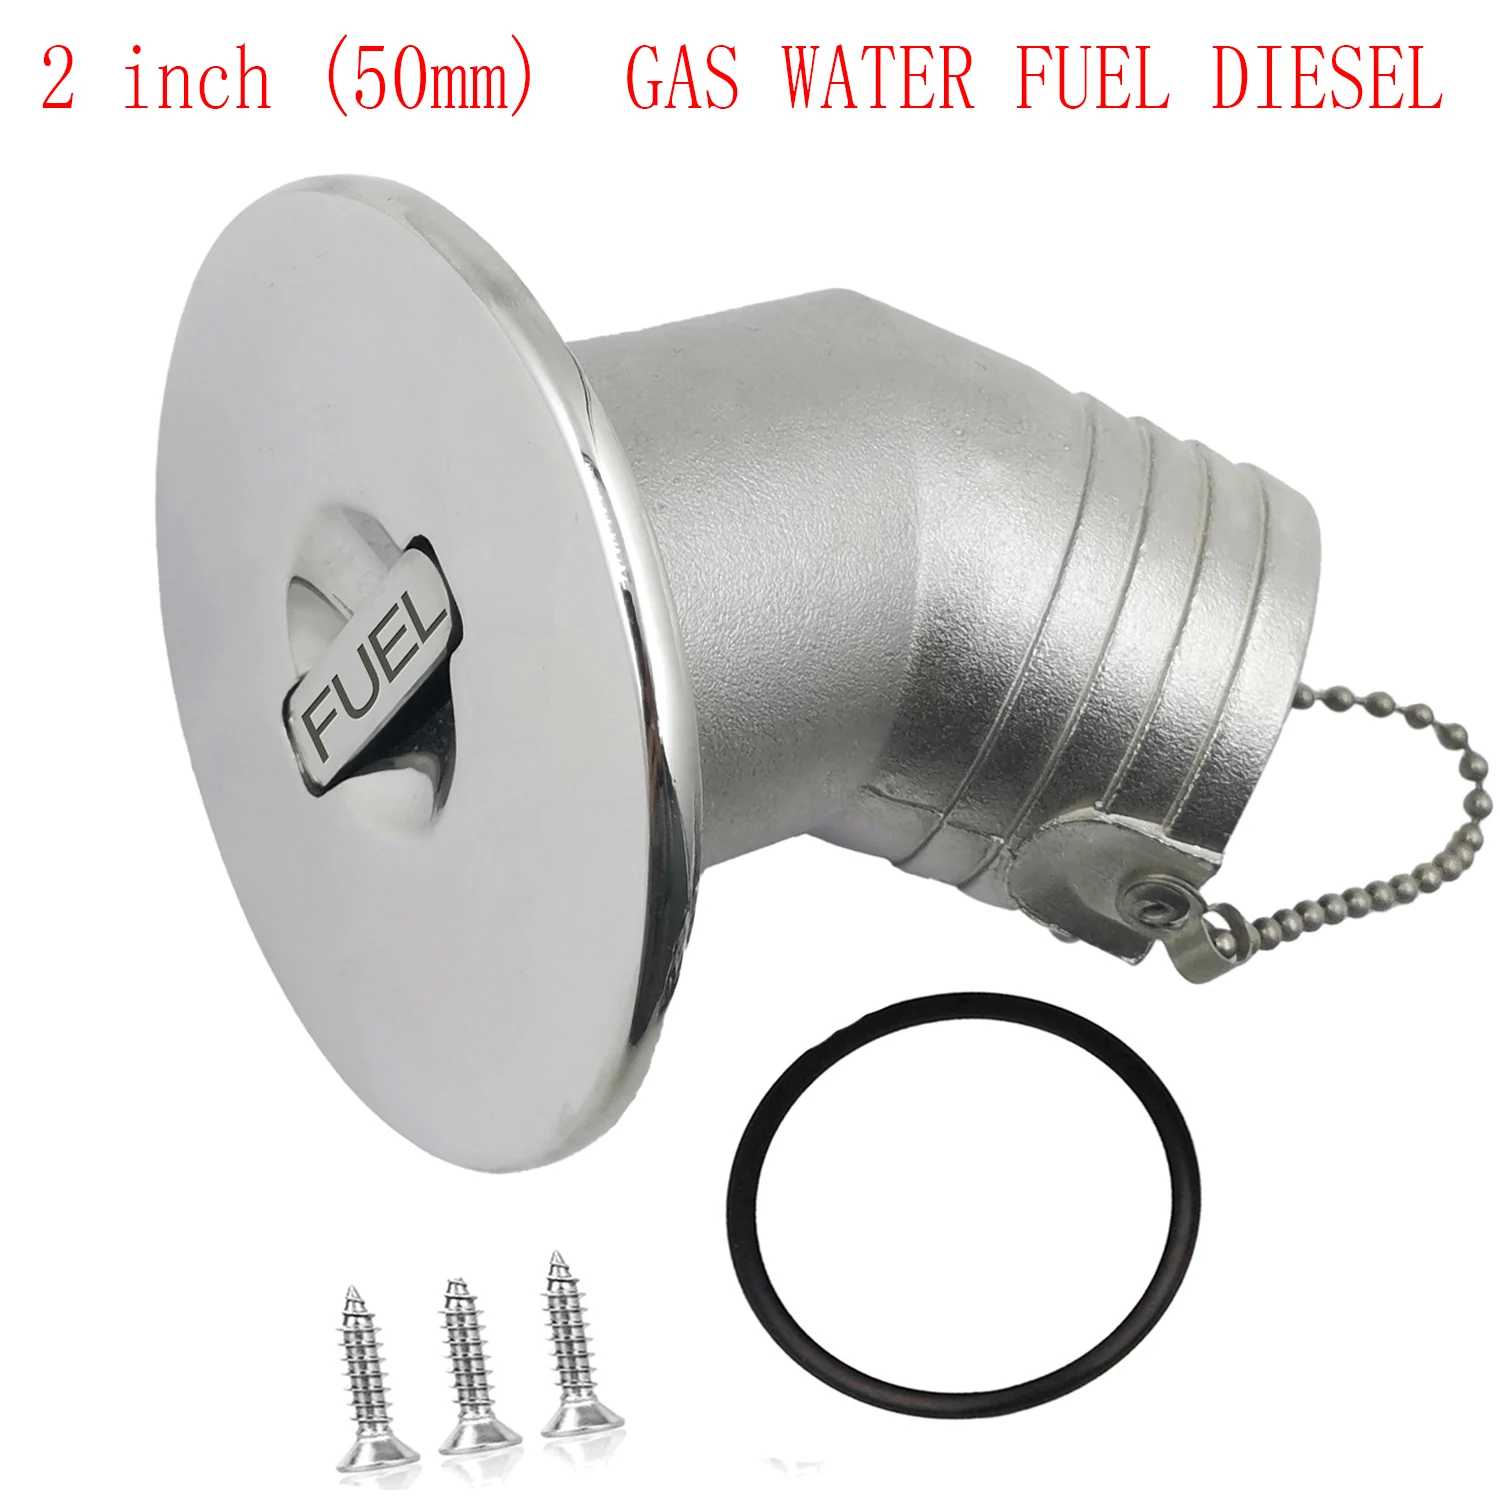 Boat Deck Gas/Fuel/Water/DEO Fill Filler Cap Angled Neck Marine Stainless Steel 316 Fuel Keyless Cap 2